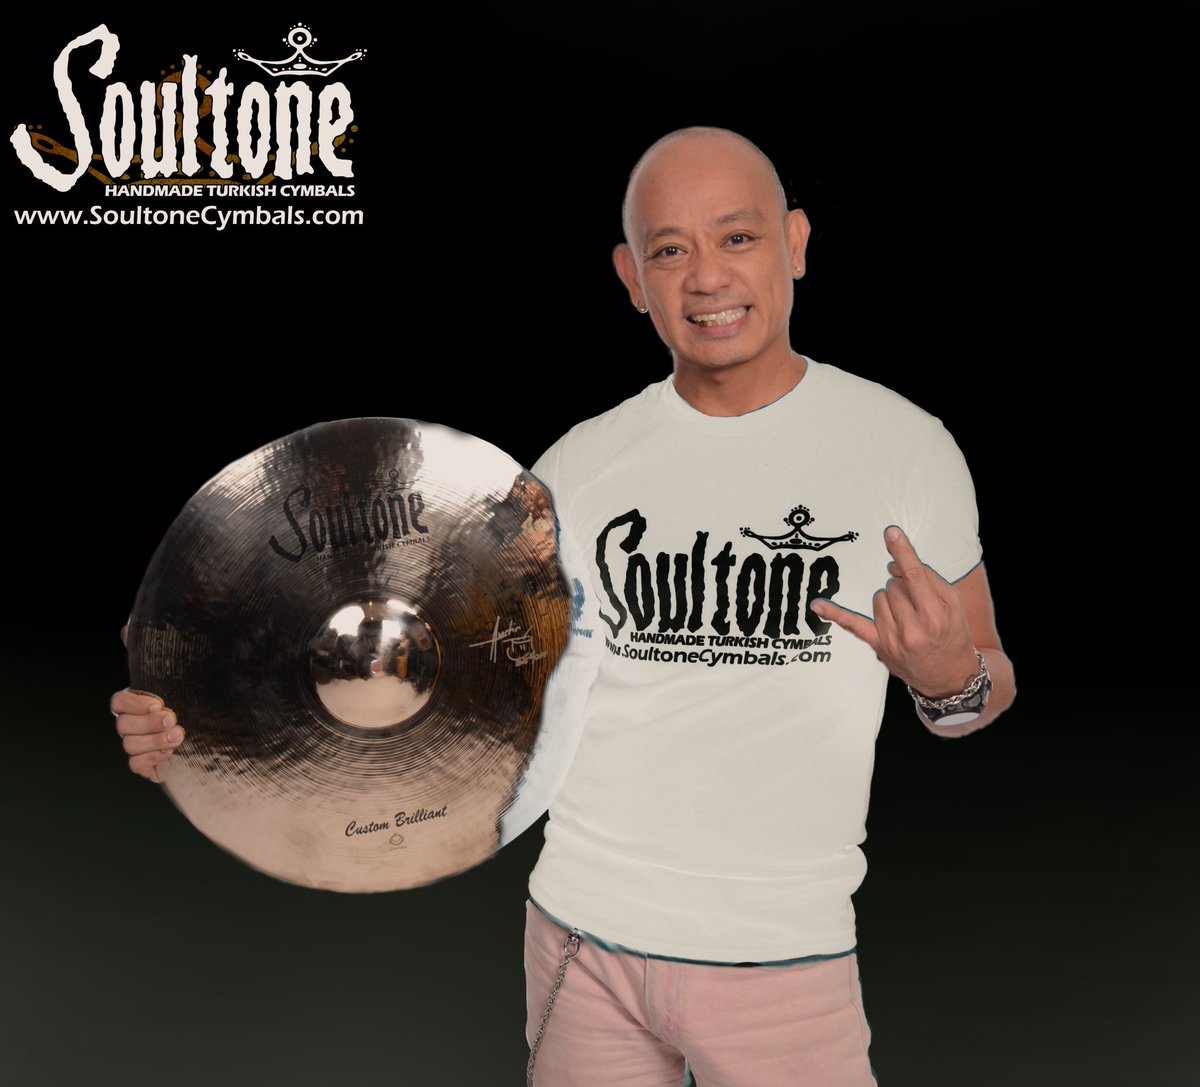 Great sounding cymbals! Soultone Cymbals  #SoultoneCymbals #DrummerFam #soultonecymbalsartist #soultonecymbalsinternational